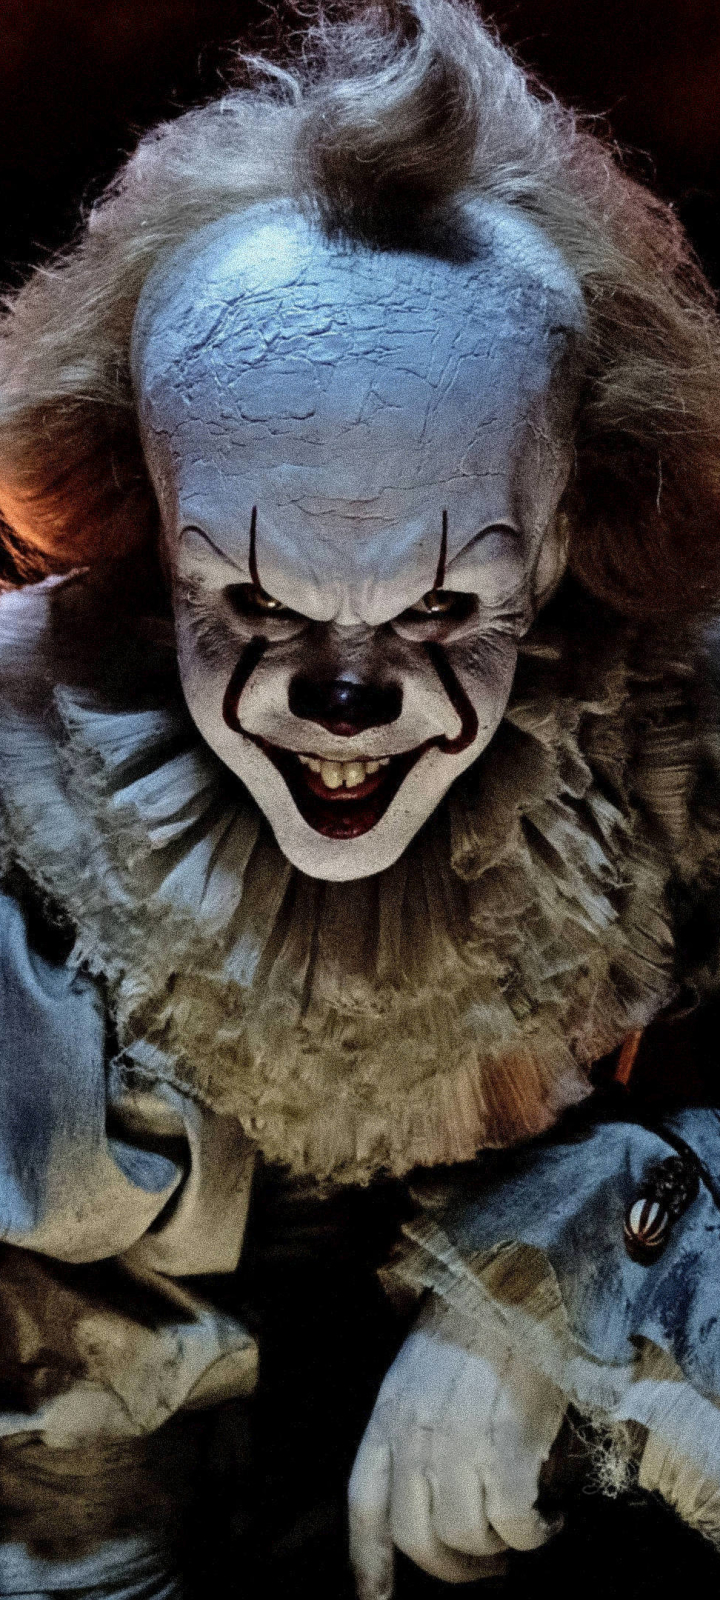 pennywise» 1080P, 2k, 4k HD wallpapers, backgrounds free download | Rare  Gallery